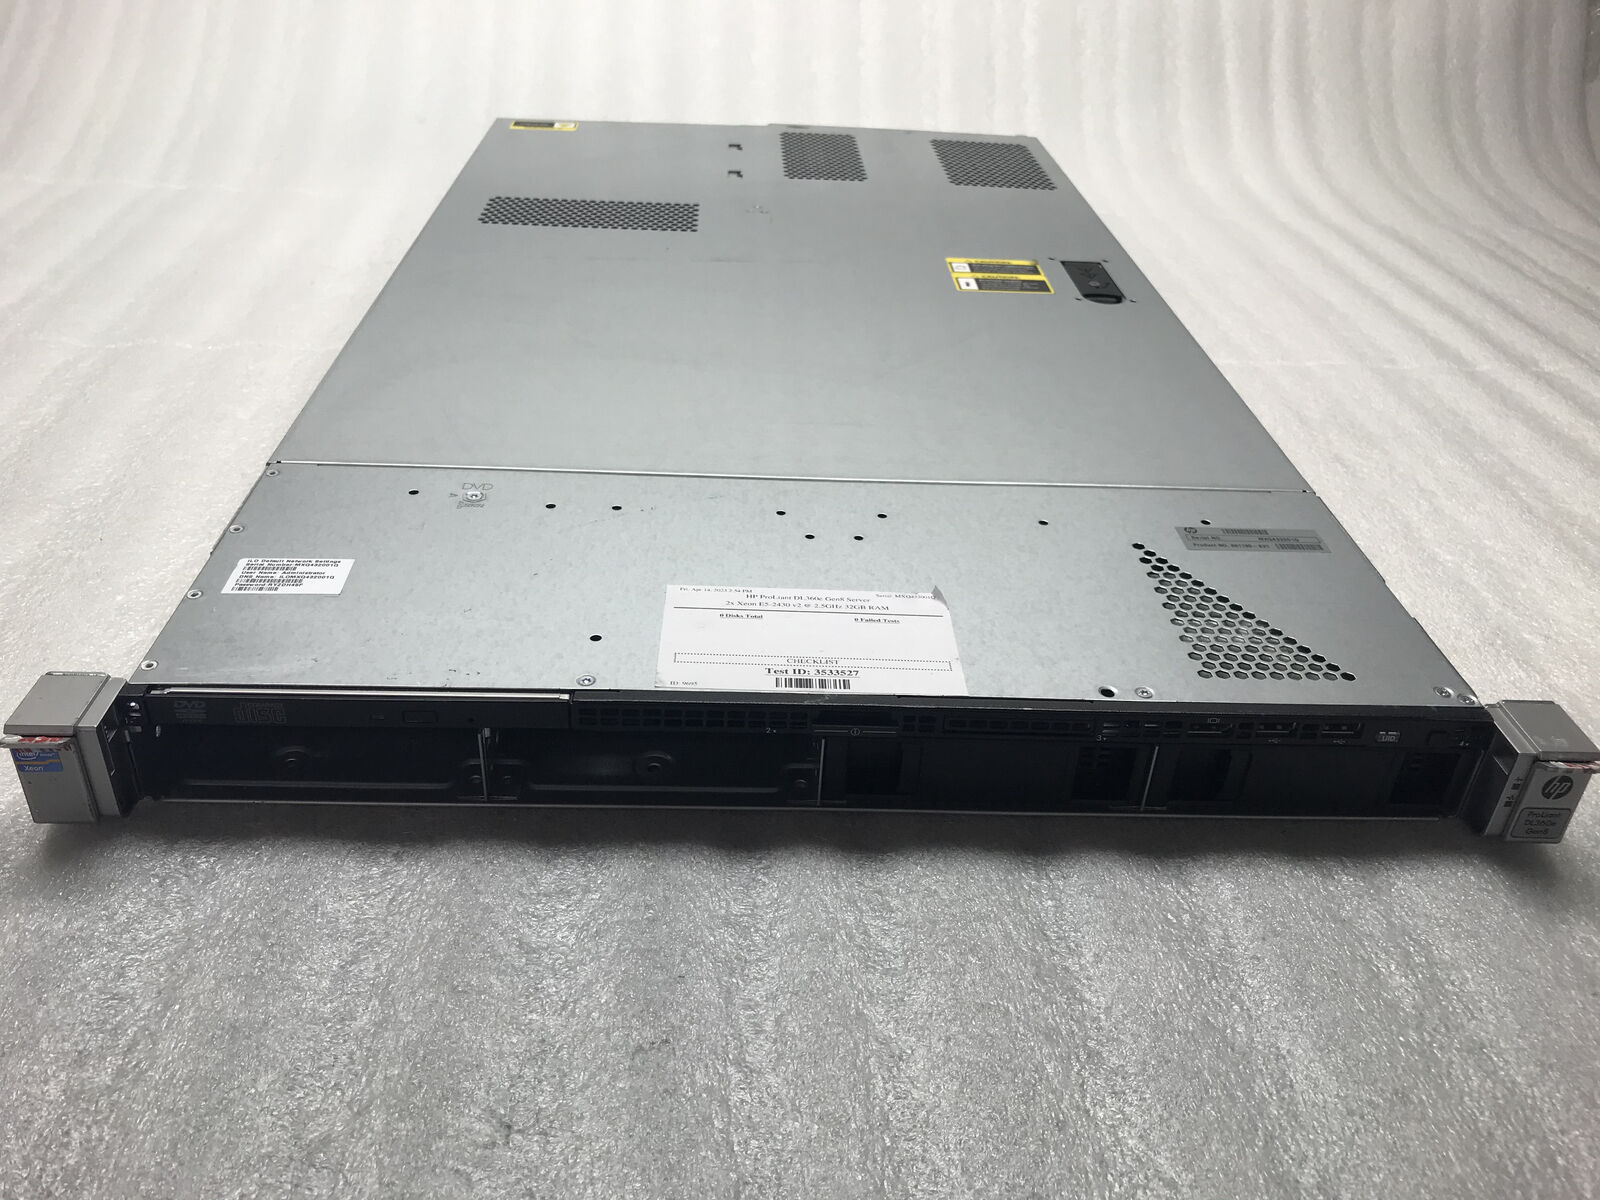 HP ProLiant DL360e Gen8 1U BOOTS 2x Xeon E5-2430 v2 2.5GHz 32GB RAM NO HDDs